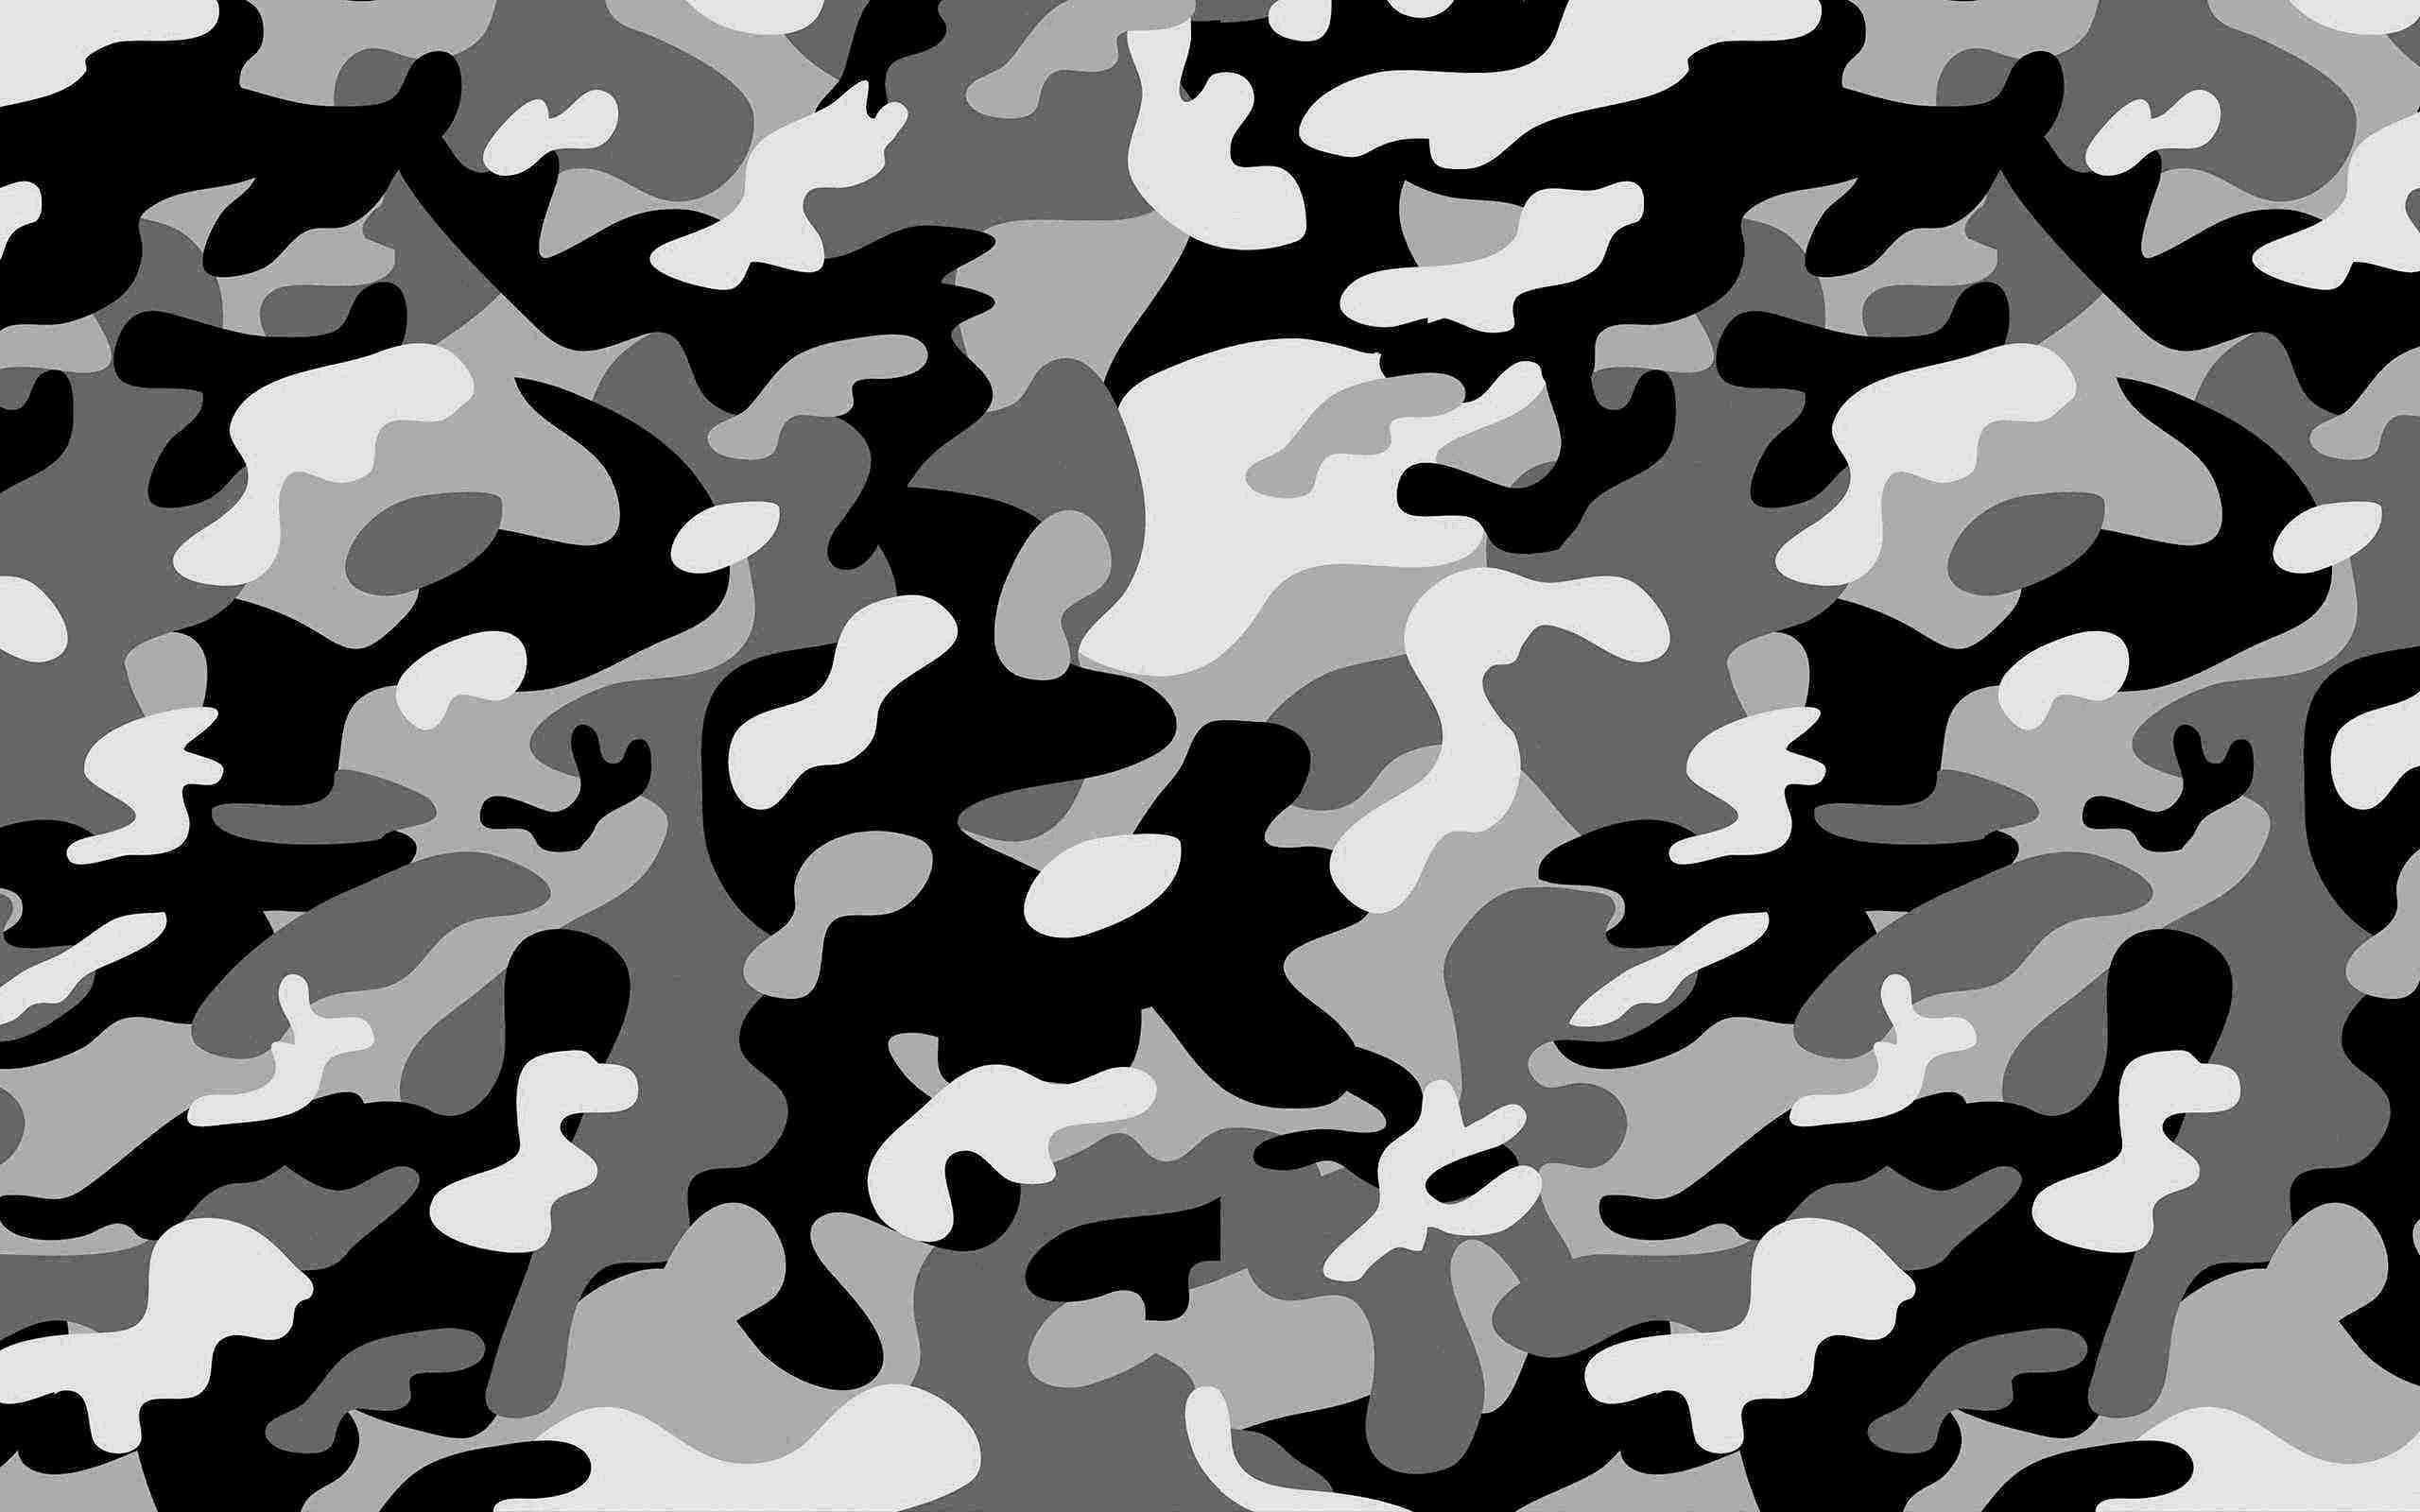 Download wallpaper dark camouflage, military camouflage, dark background, camouflage pattern, camouflage textures, camouflage, black camouflage for desktop with resolution 2560x1600. High Quality HD picture wallpaper